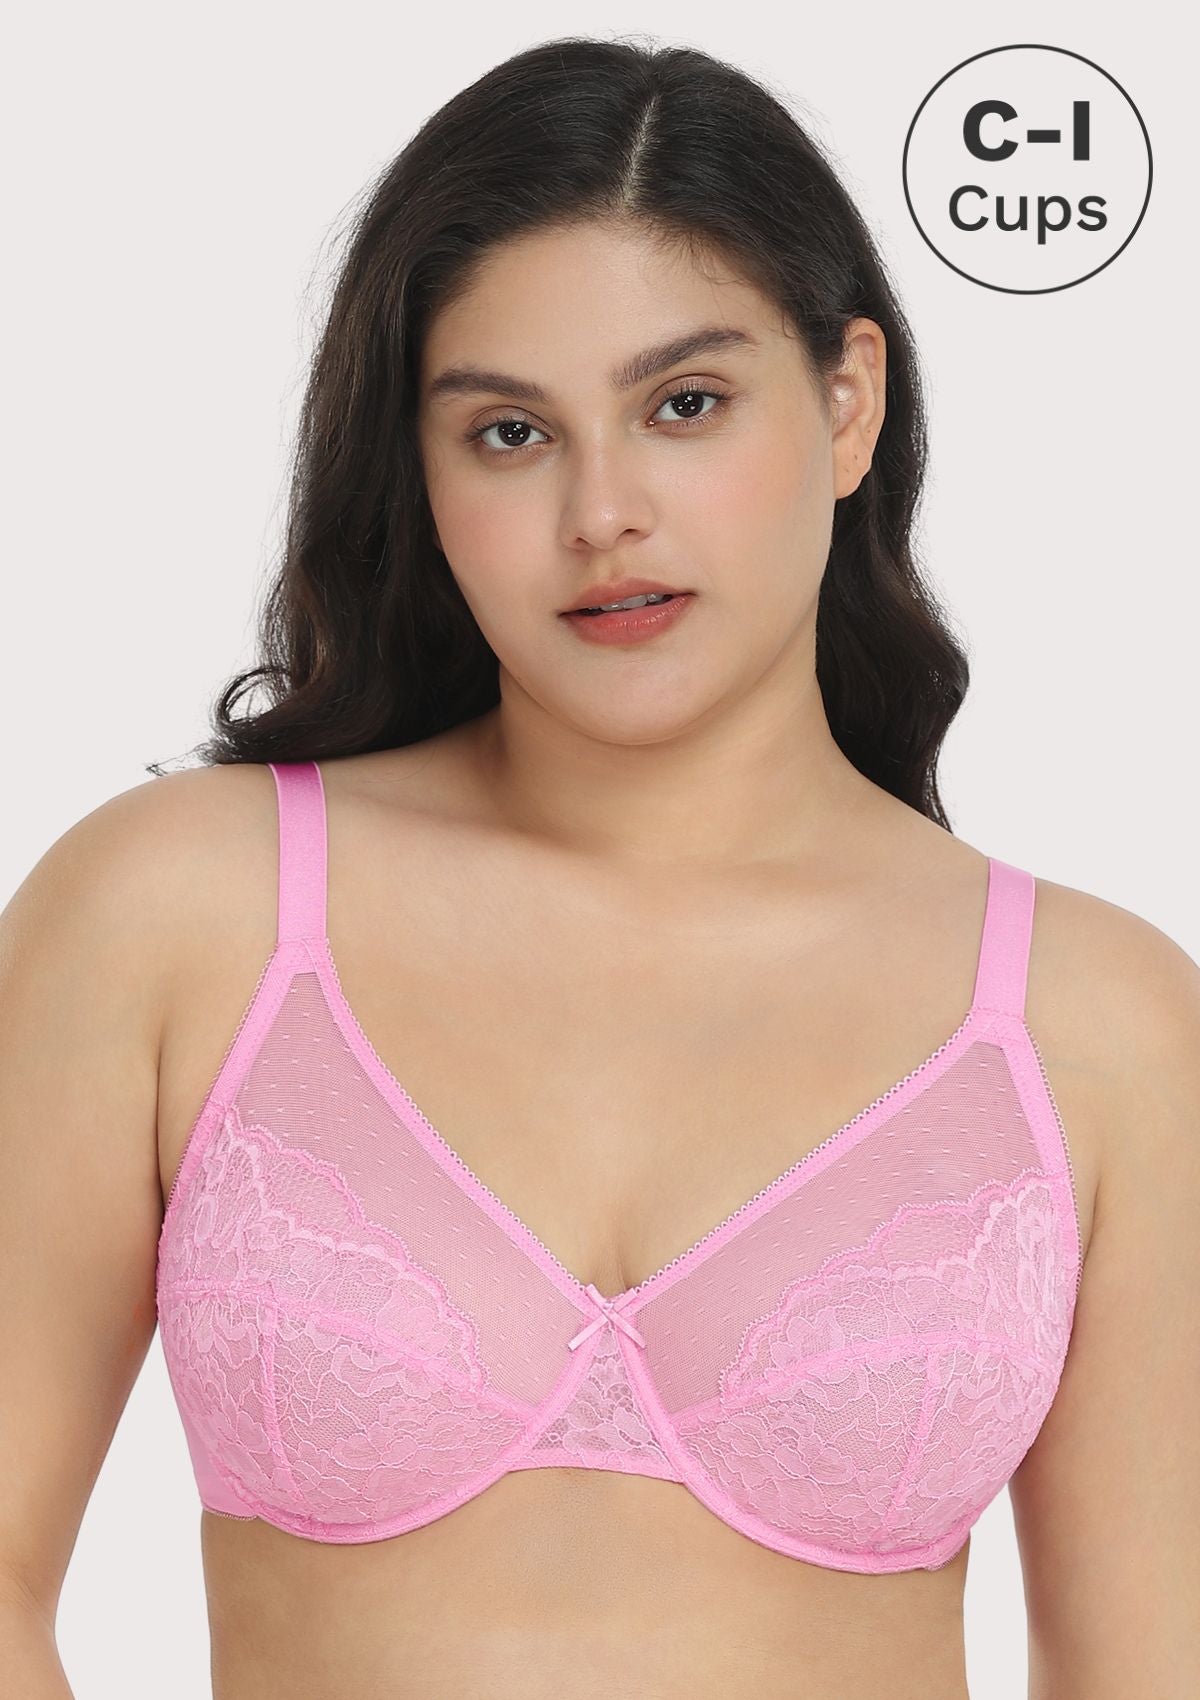 HSIA Enchante Lacy Bra: Comfy Sheer Lace Bra With Lift - Pink / 40 / H